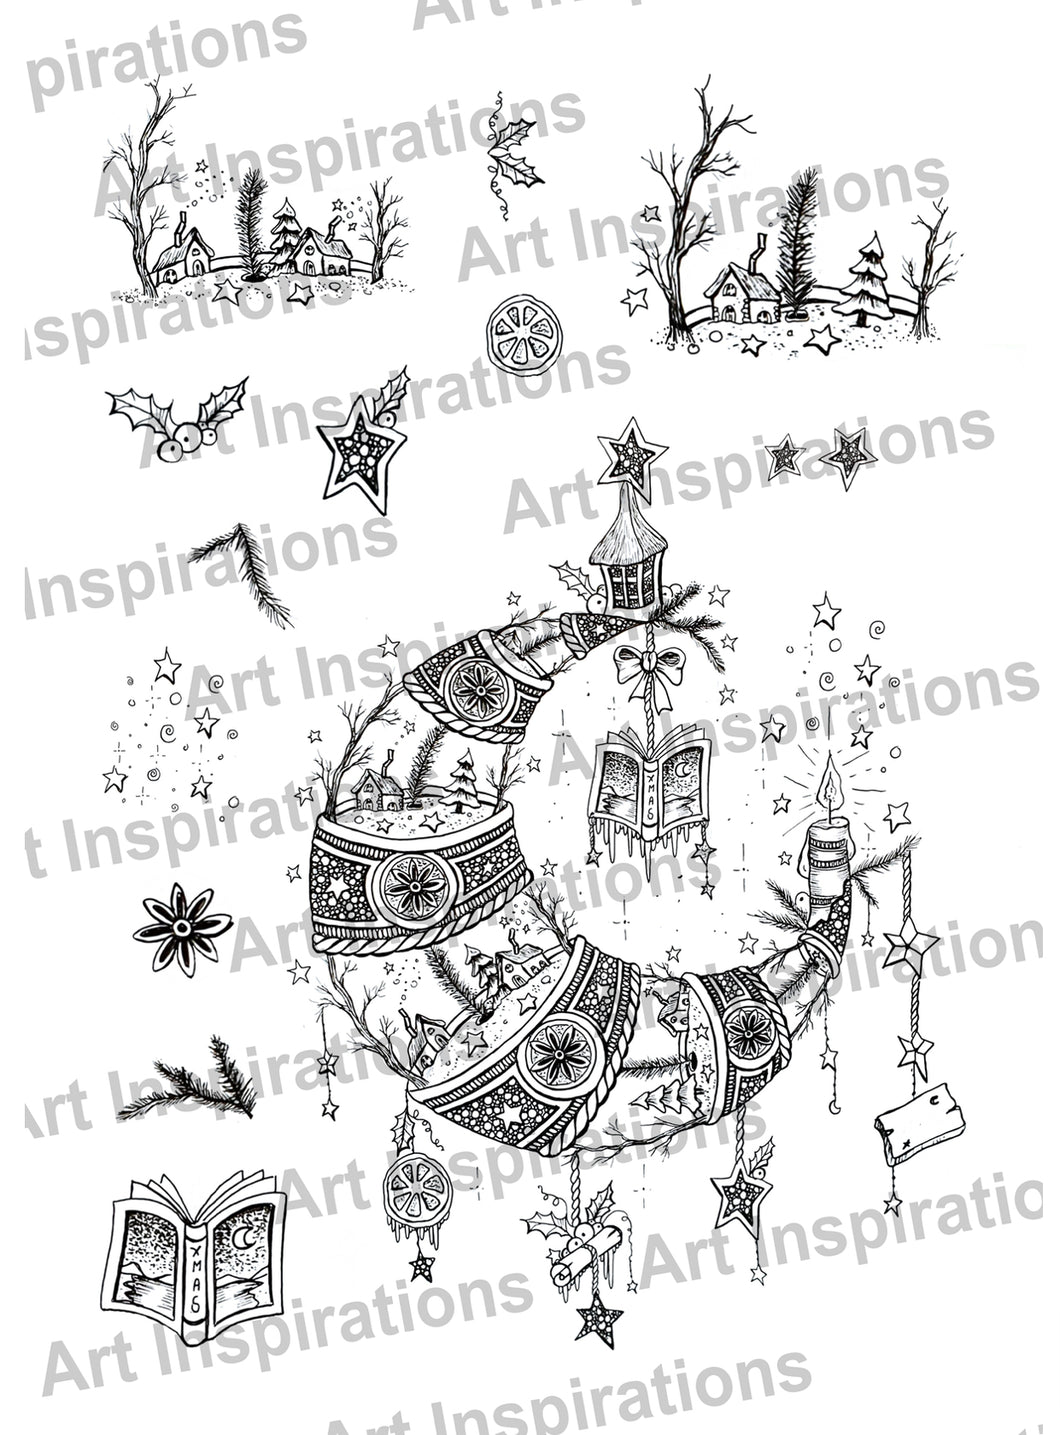 Art Inspirations with Martina A5 Stamp Set - Christmas Crescent Moon - 13 Stamps